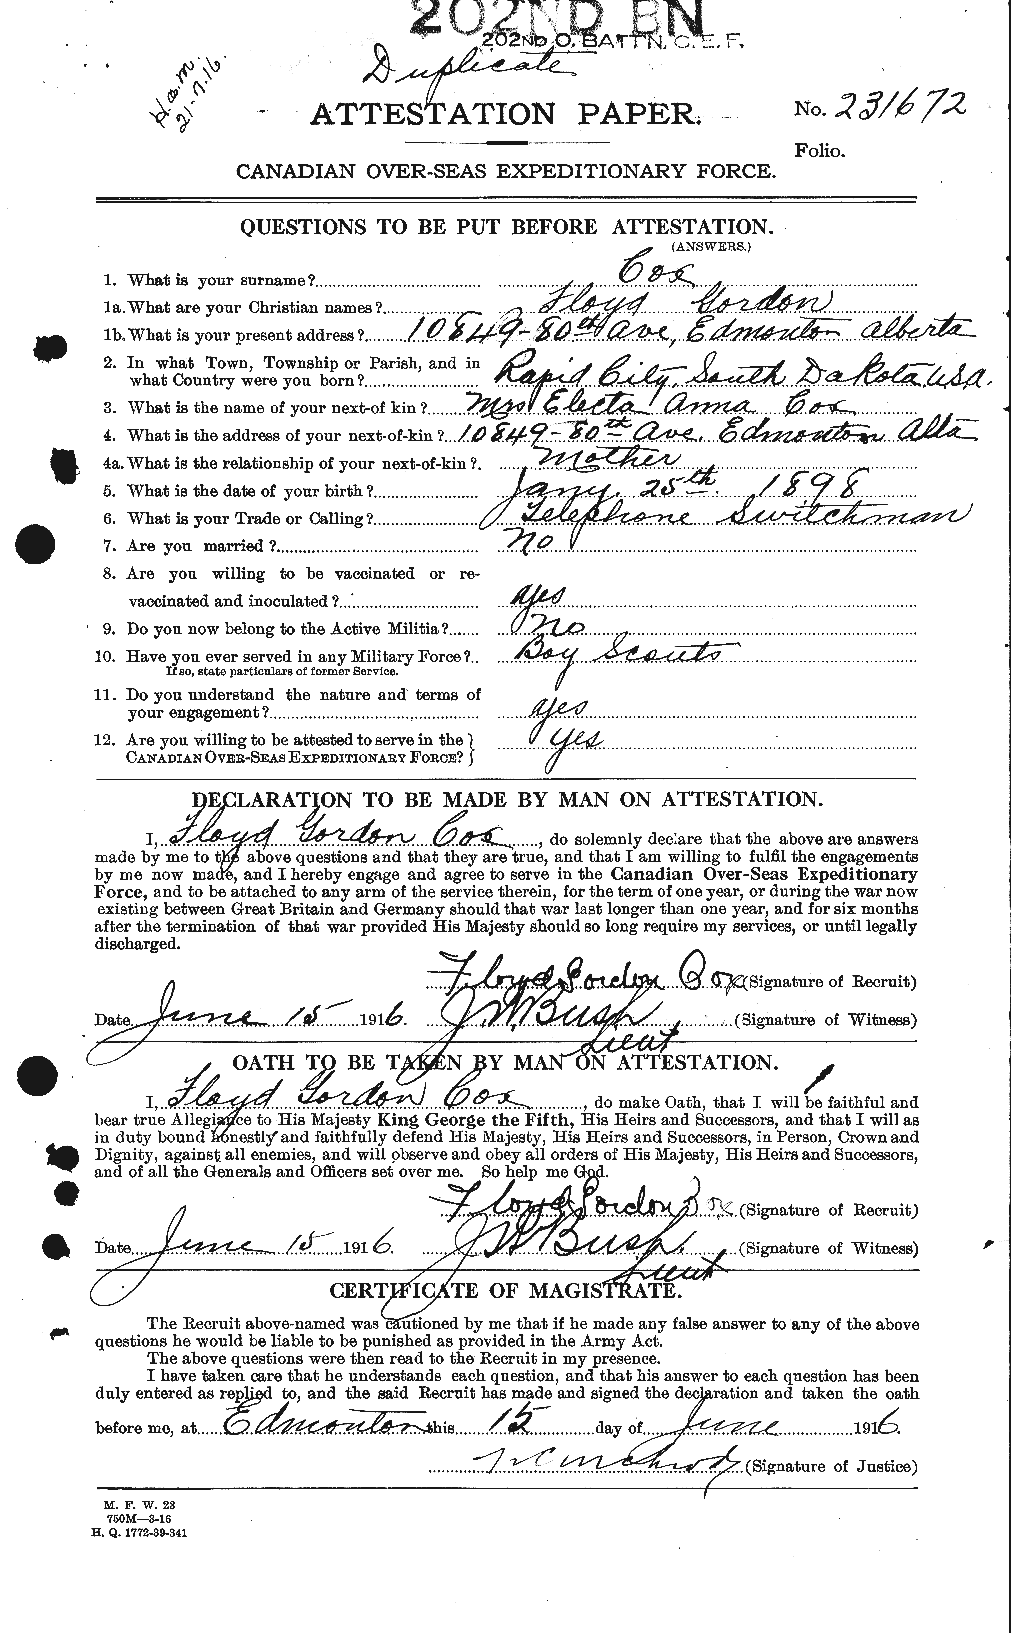 Personnel Records of the First World War - CEF 068078a